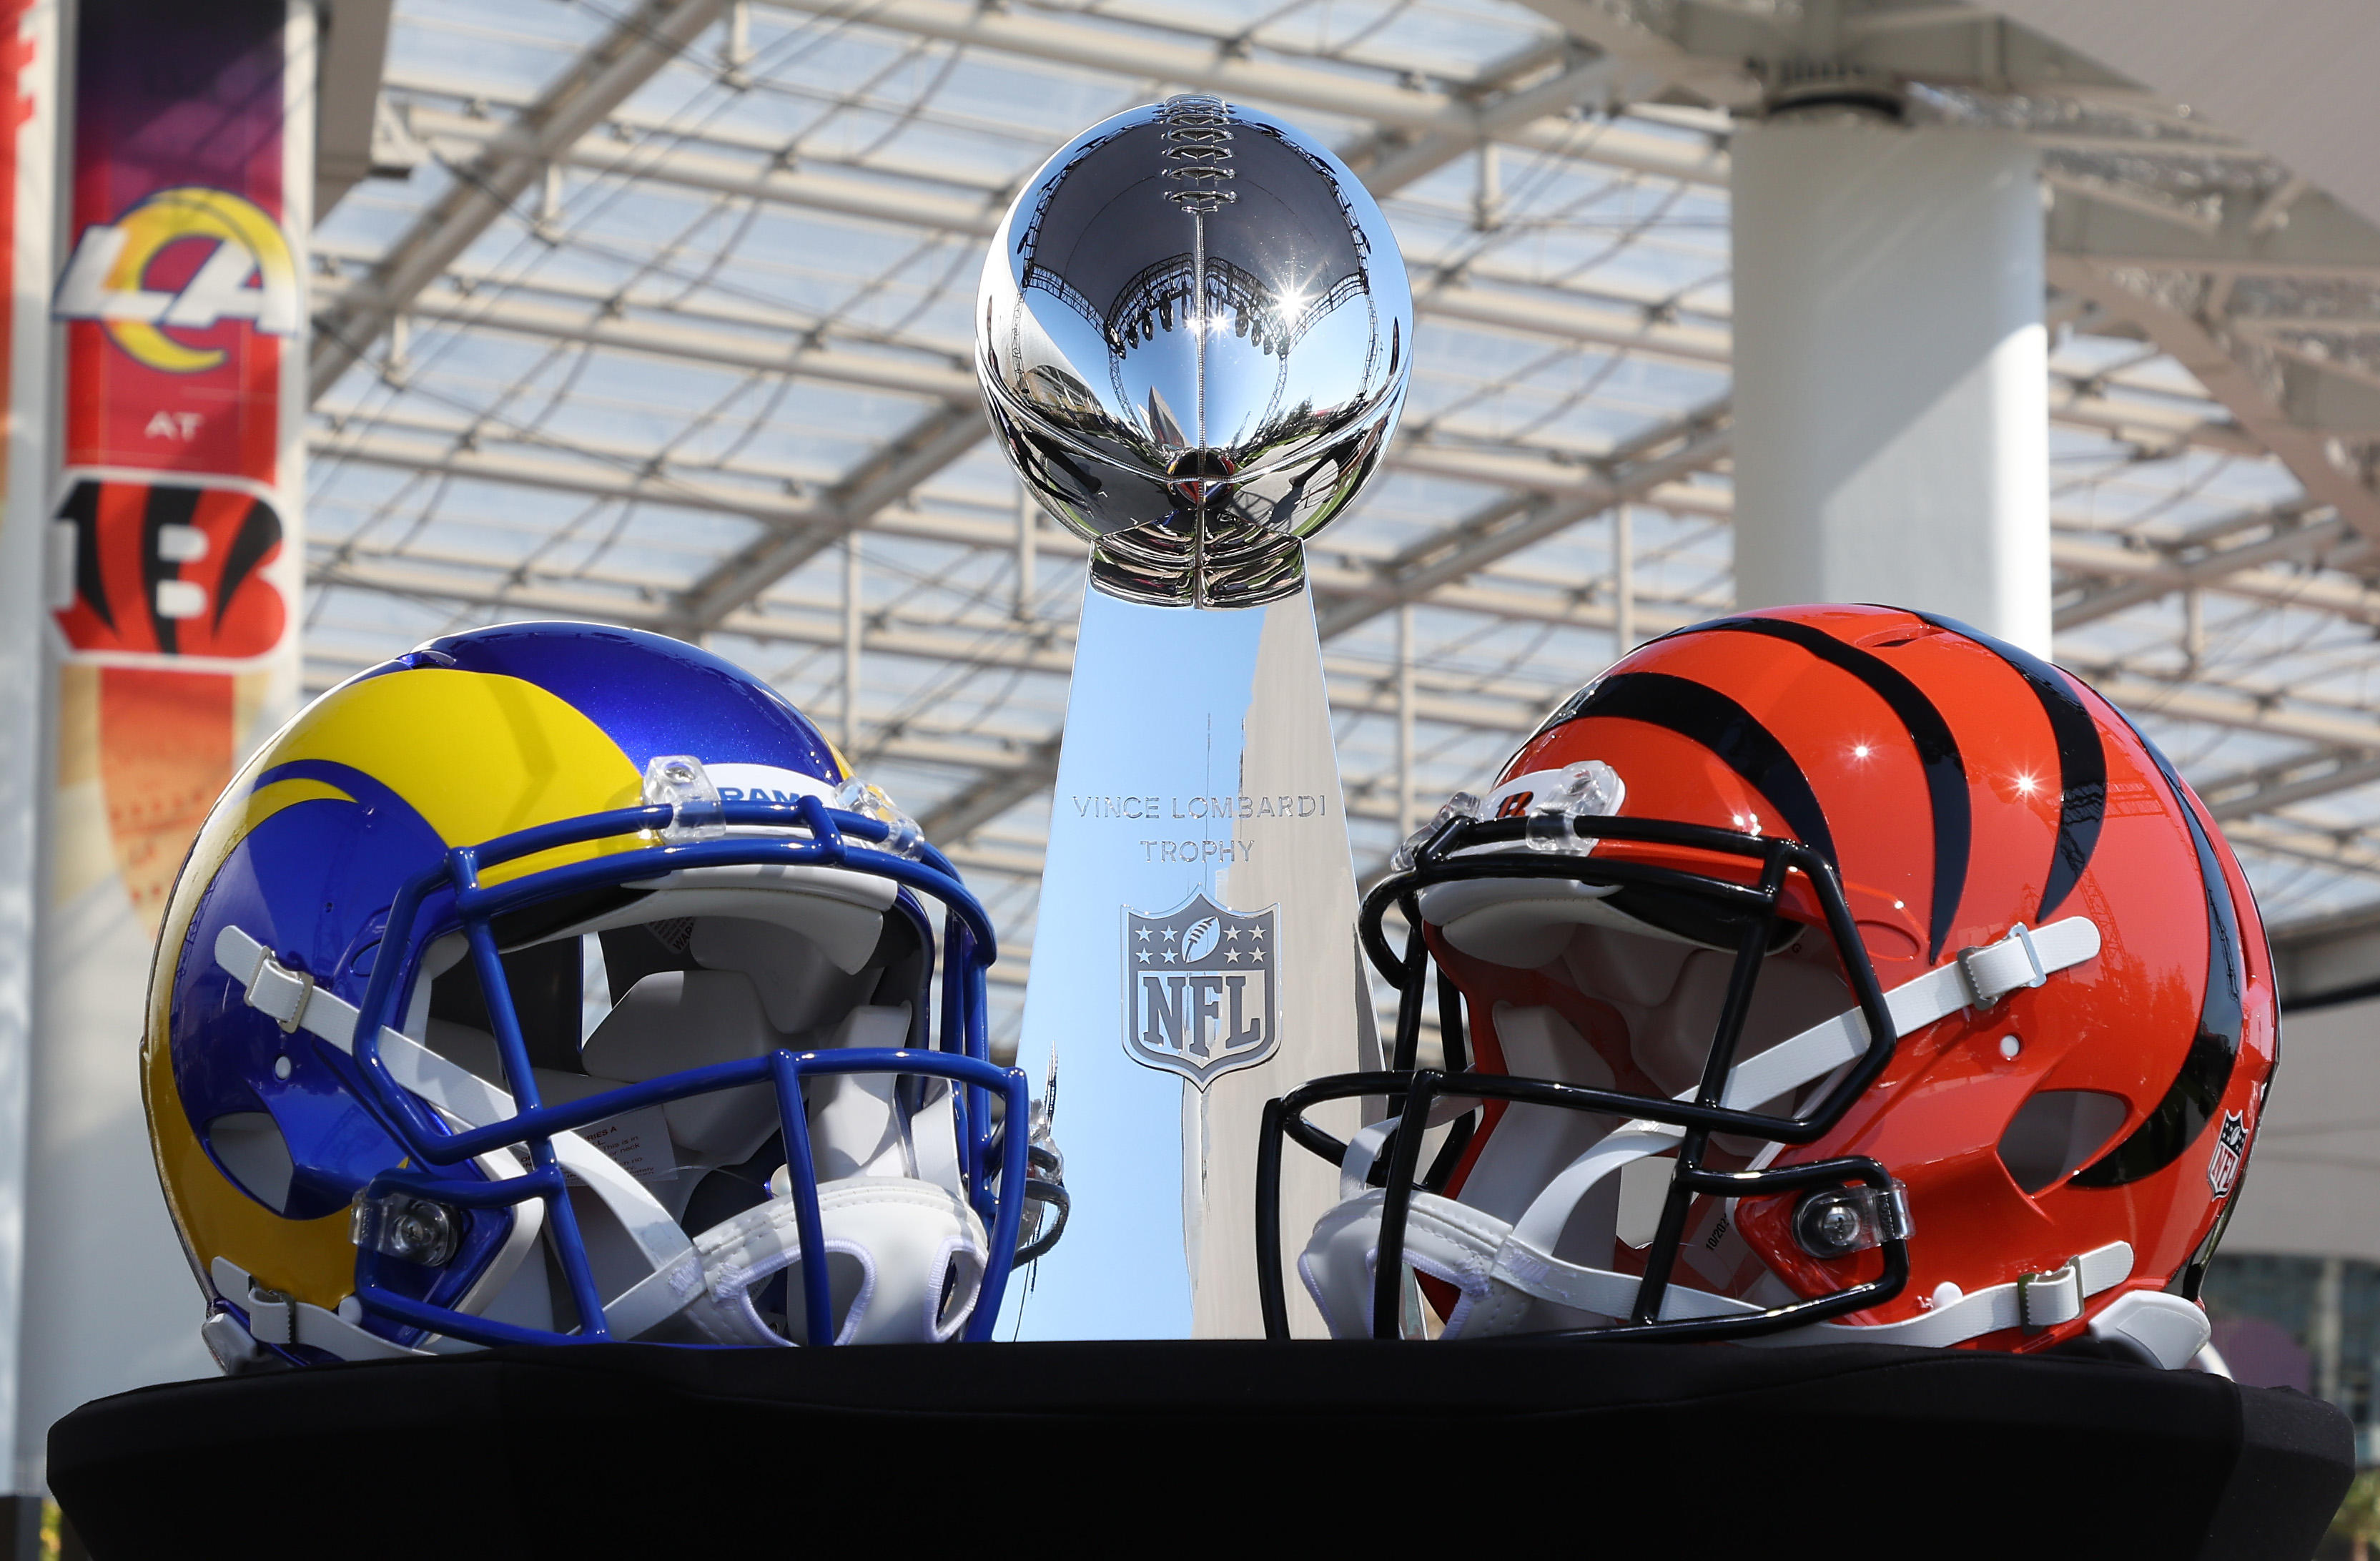 Super Bowl 2022 on track to be hottest super bowl yet 